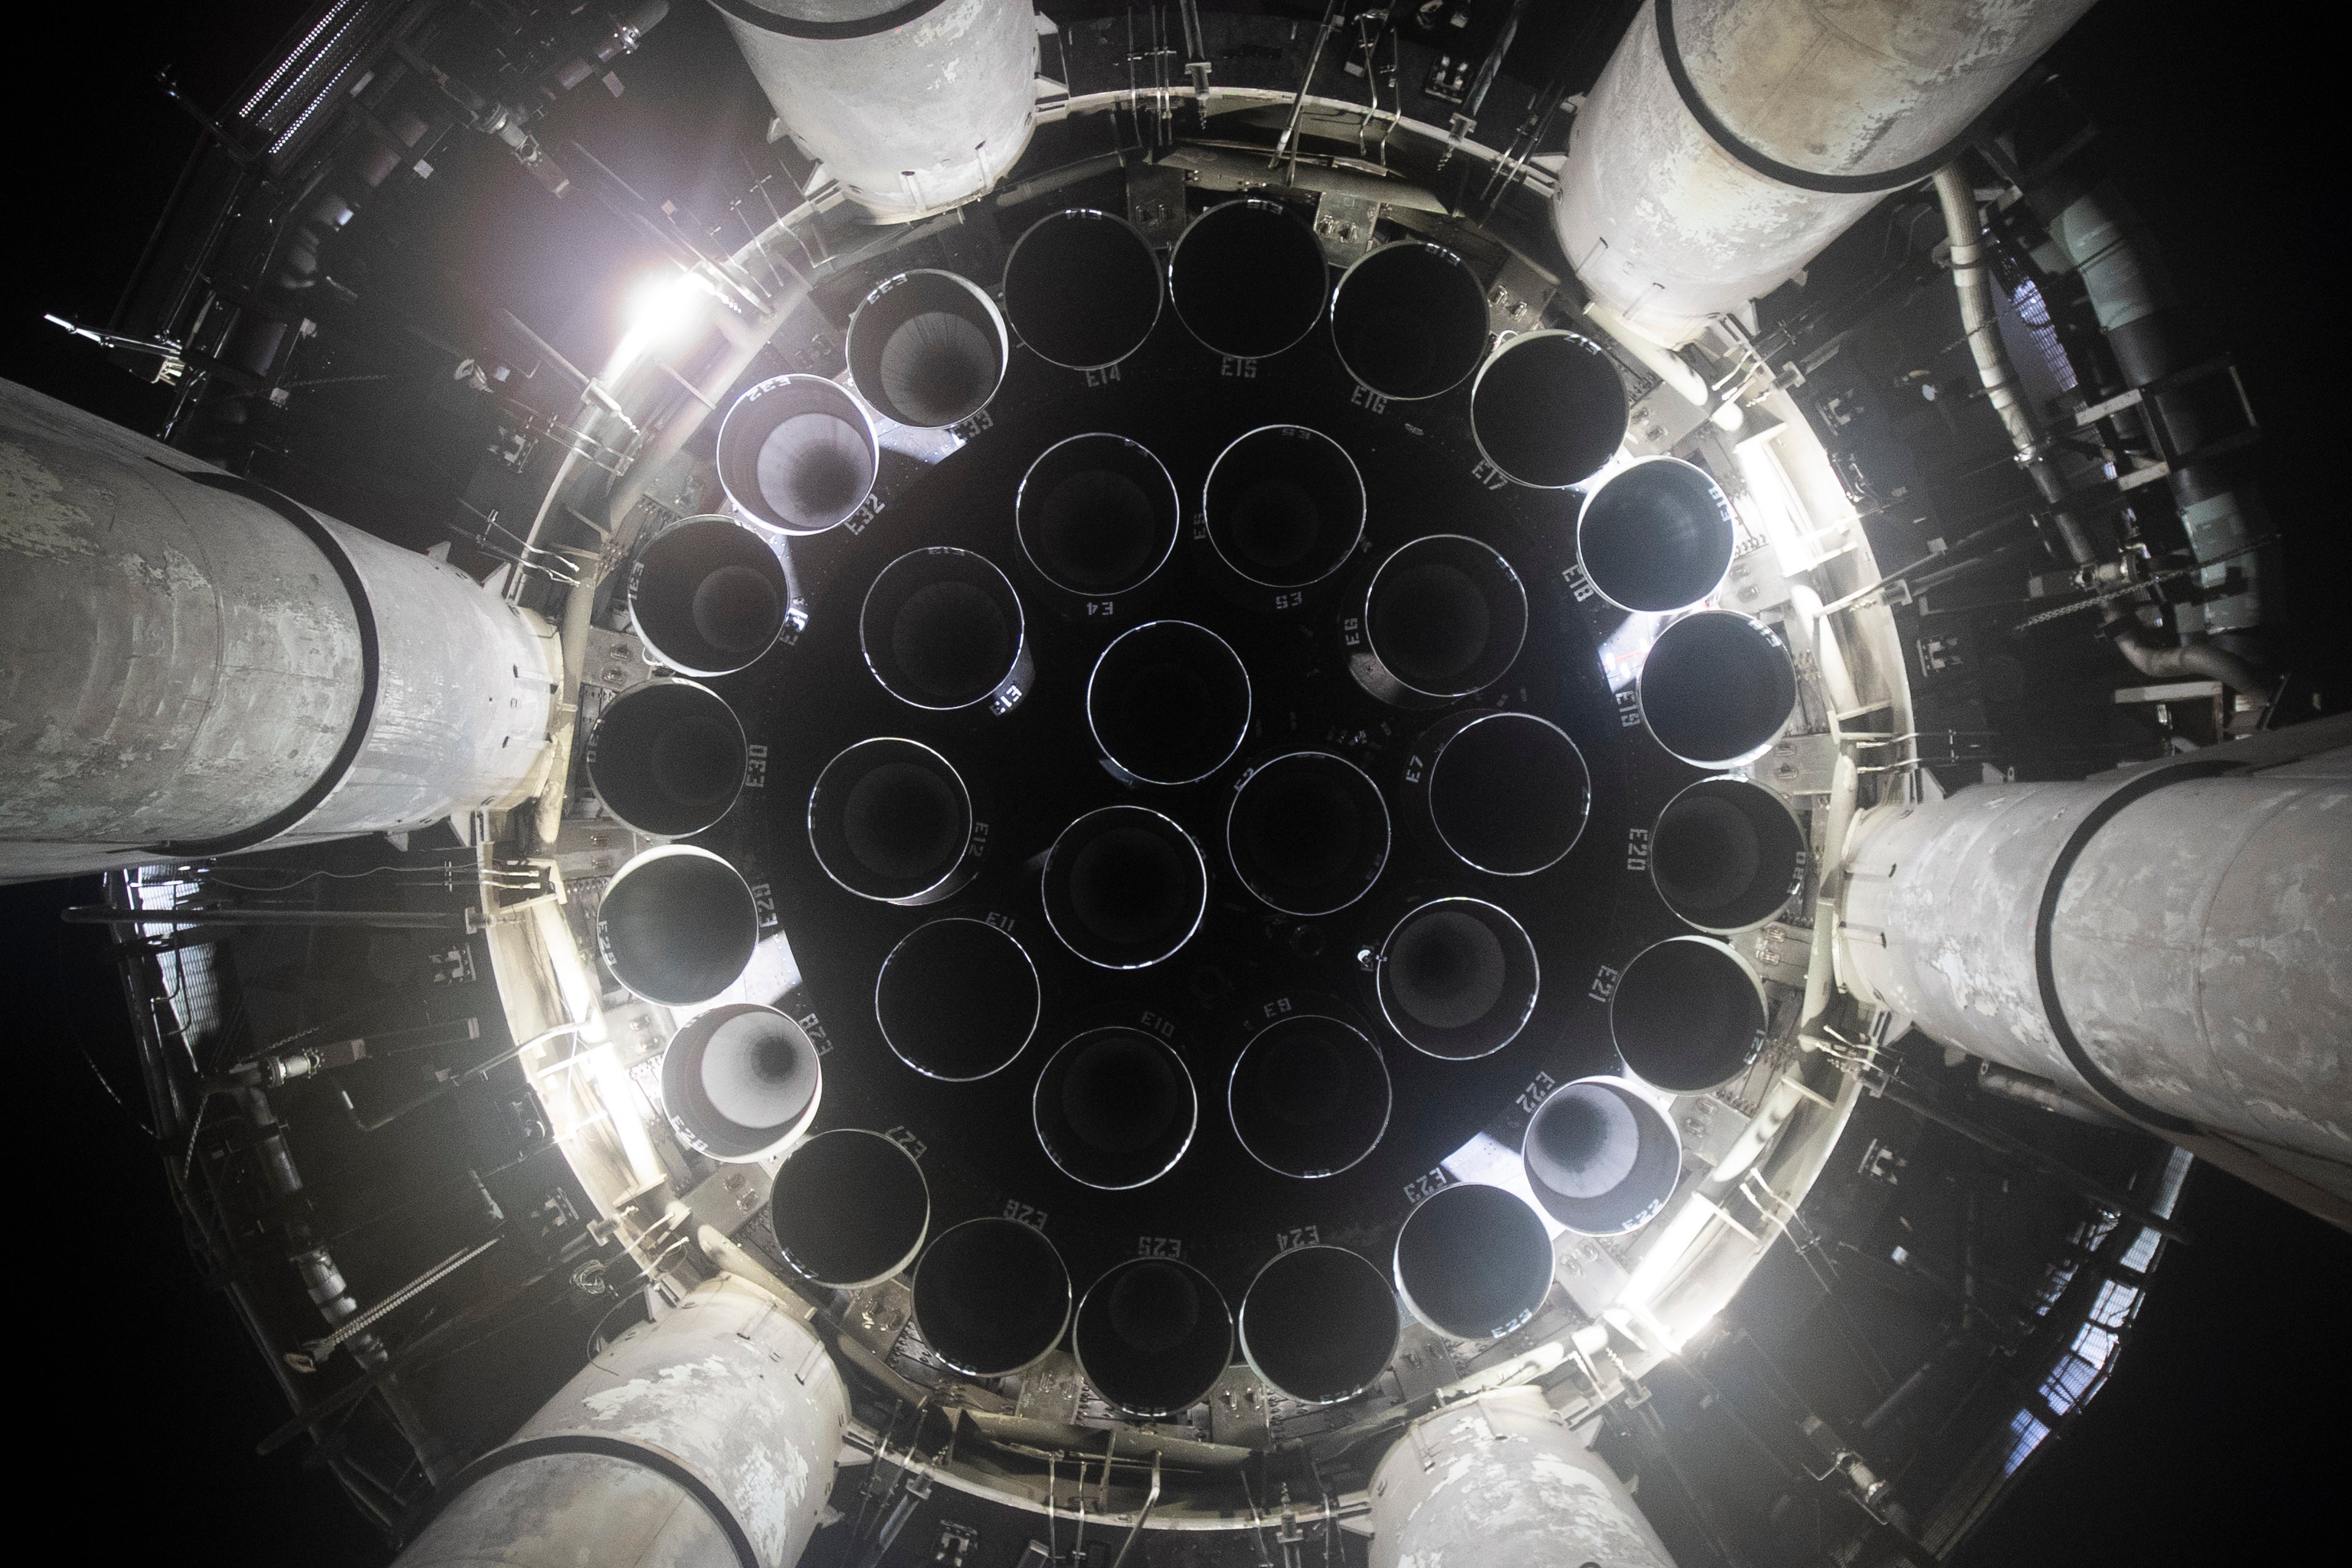 The view beneath Booster 7, showing all 33 Raptor engines.  (Photo: SpaceX)